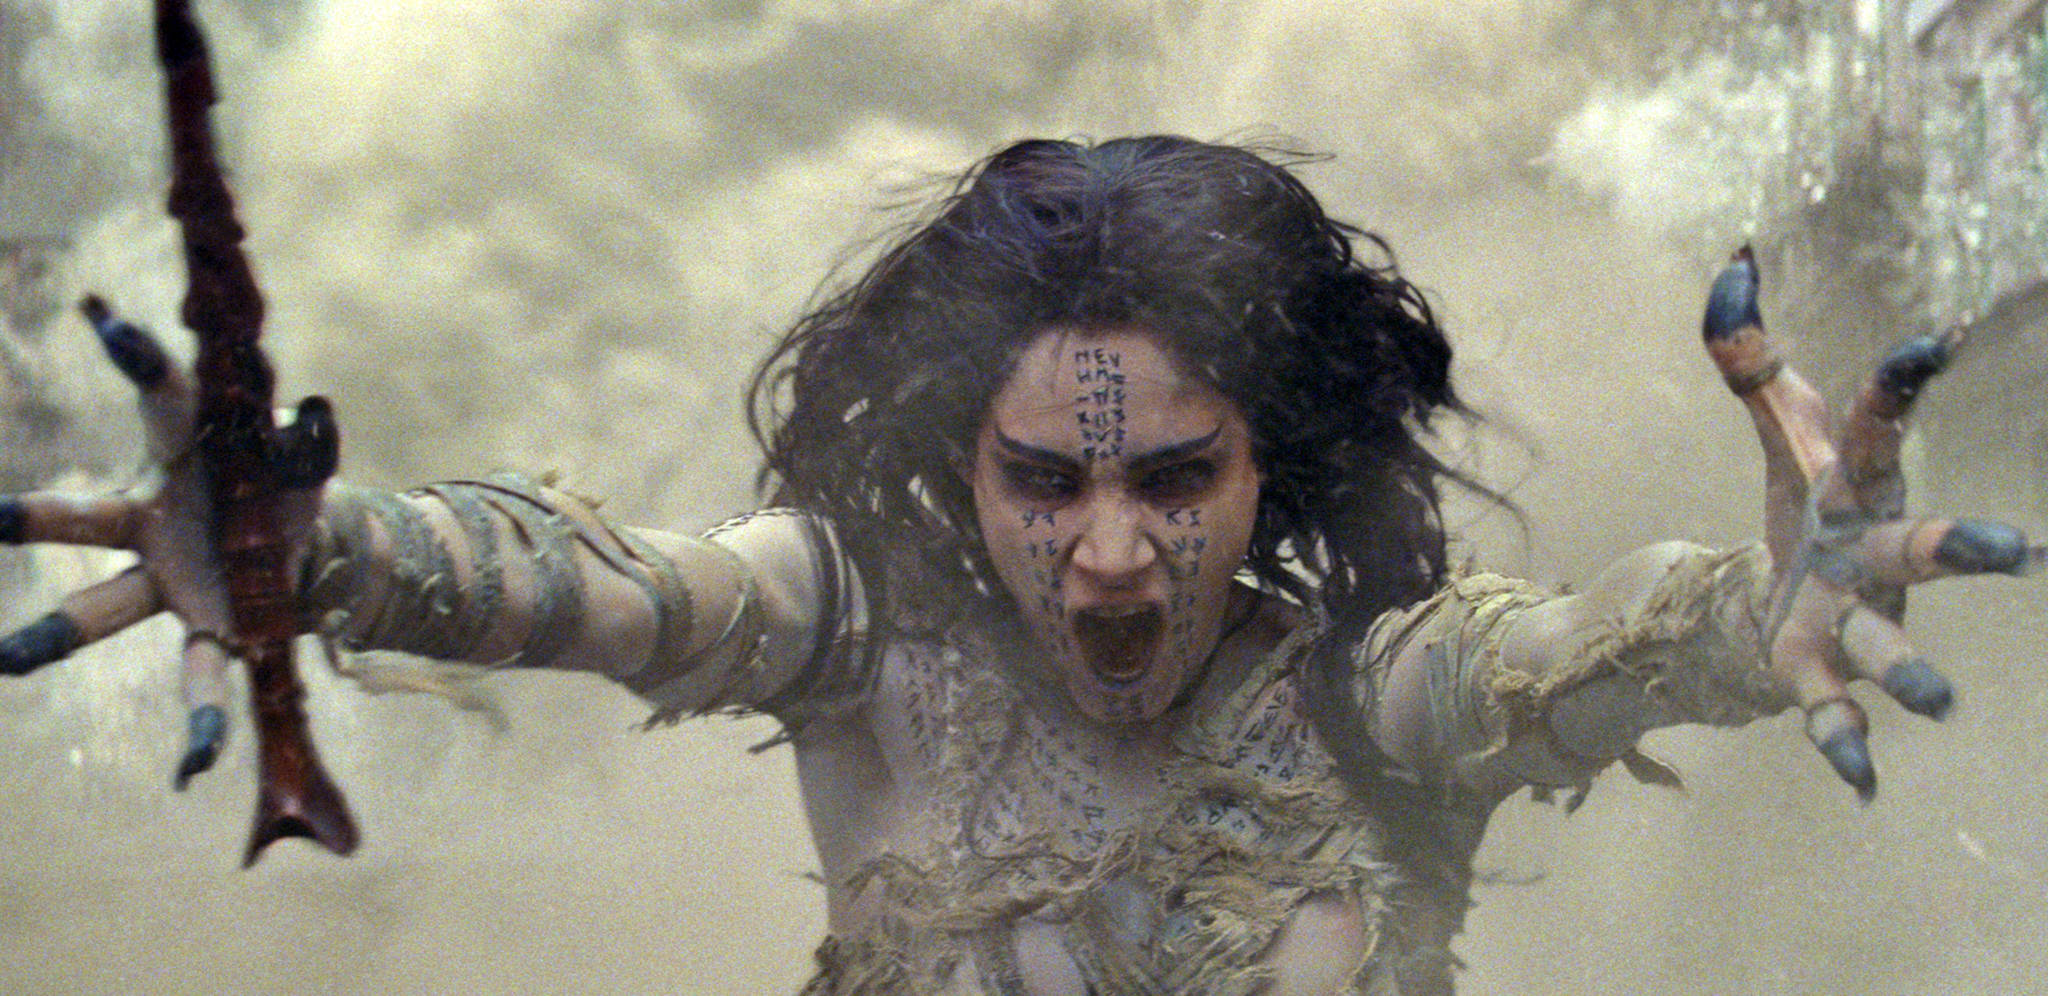 In this image released by Universal Pictures, Sofia Boutella appears in a scene from, “The Mummy.” (Universal Pictures via AP)